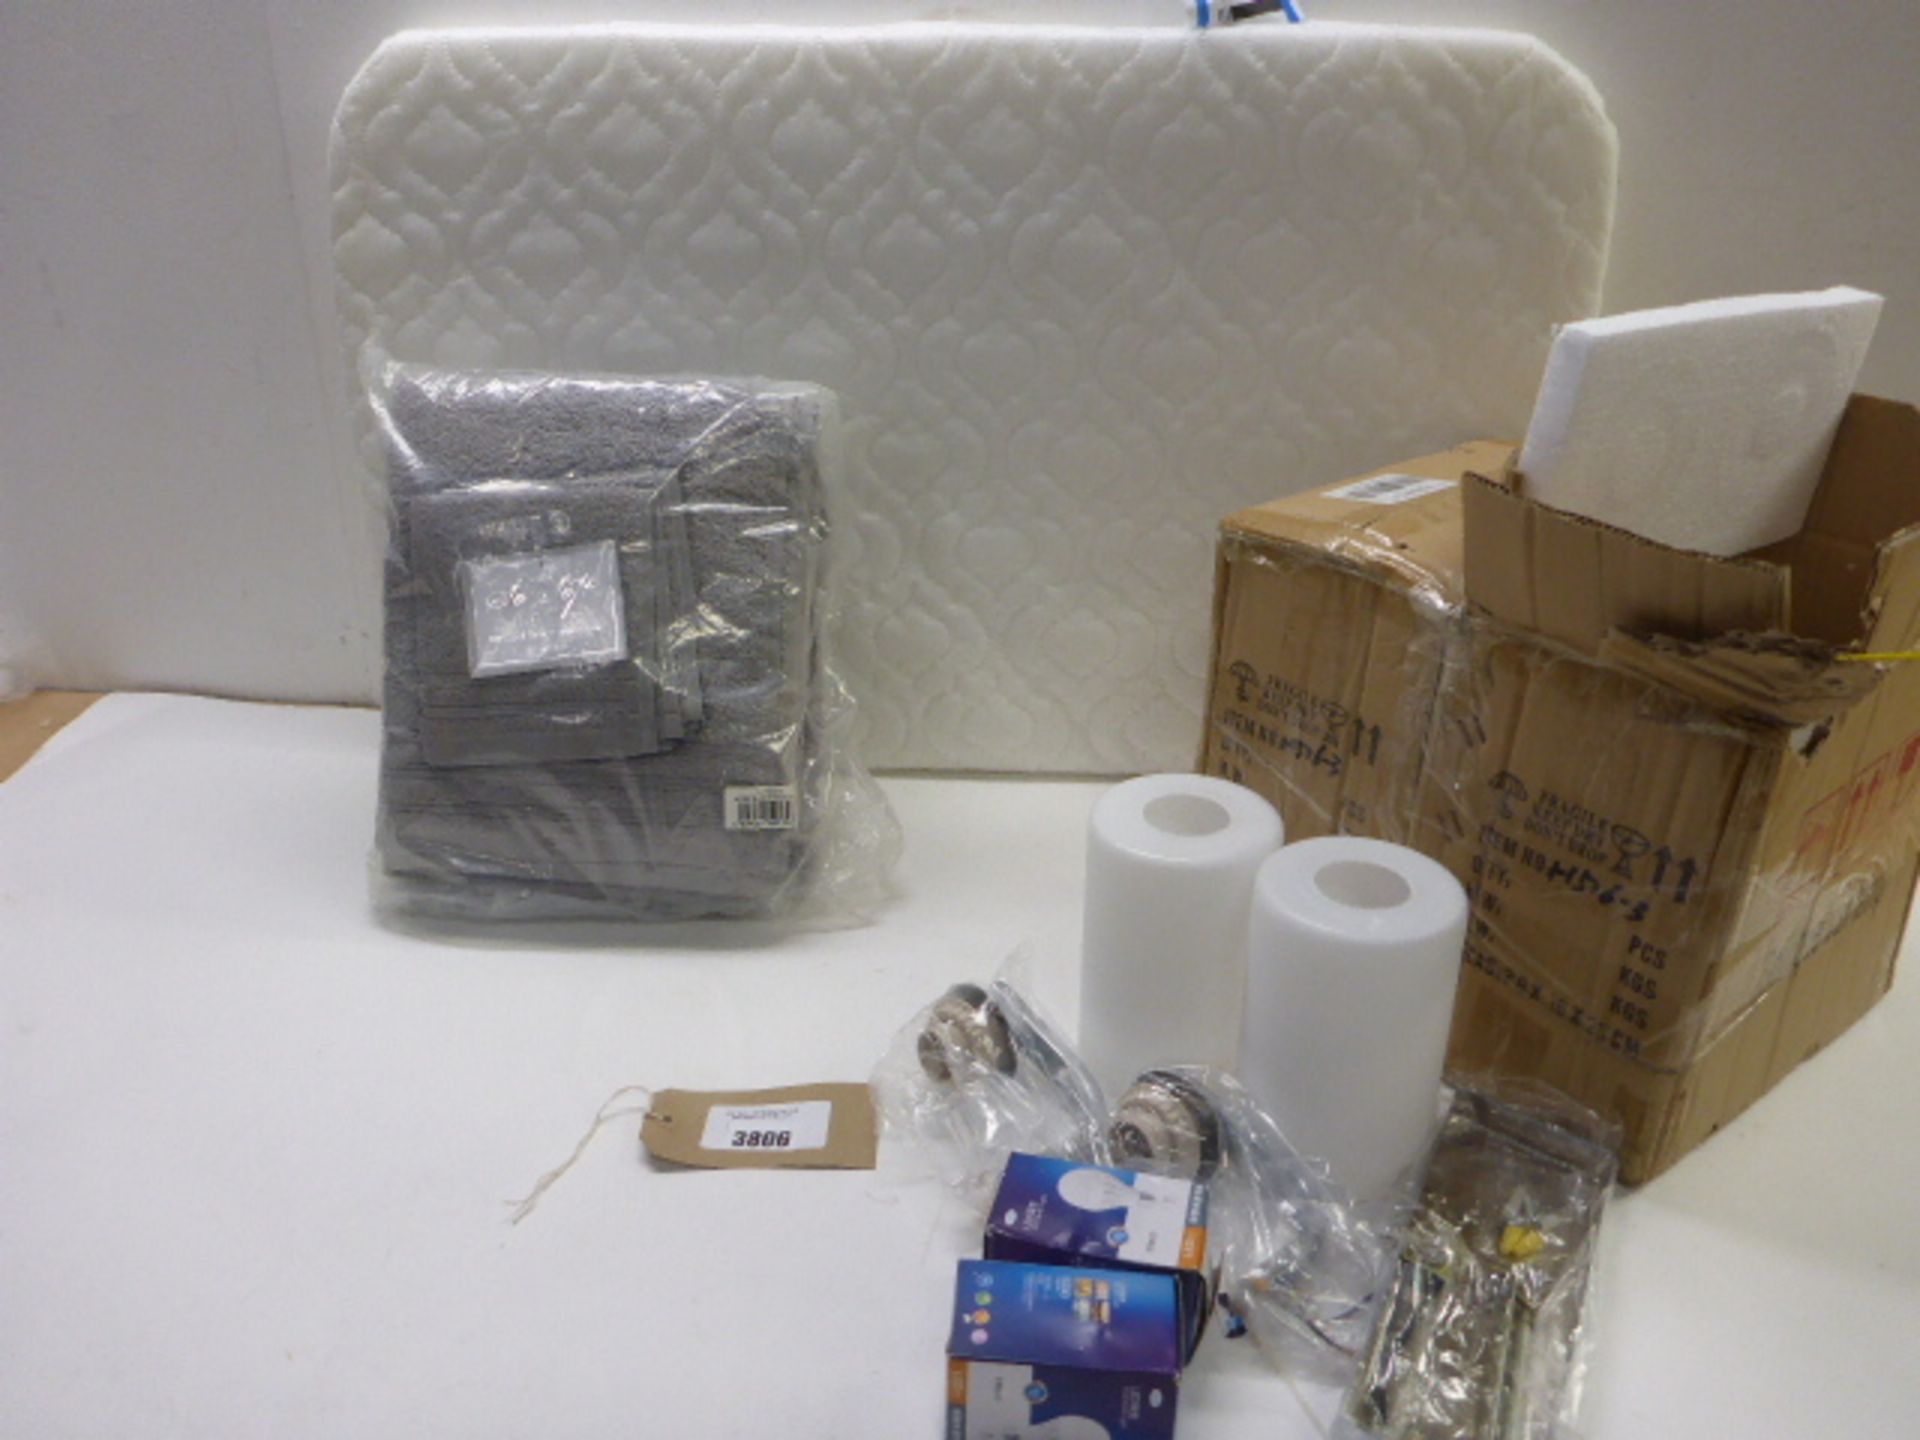 2 boxes of 2 Boutique lamps, cot mattress and Bale of 6 towels in grey